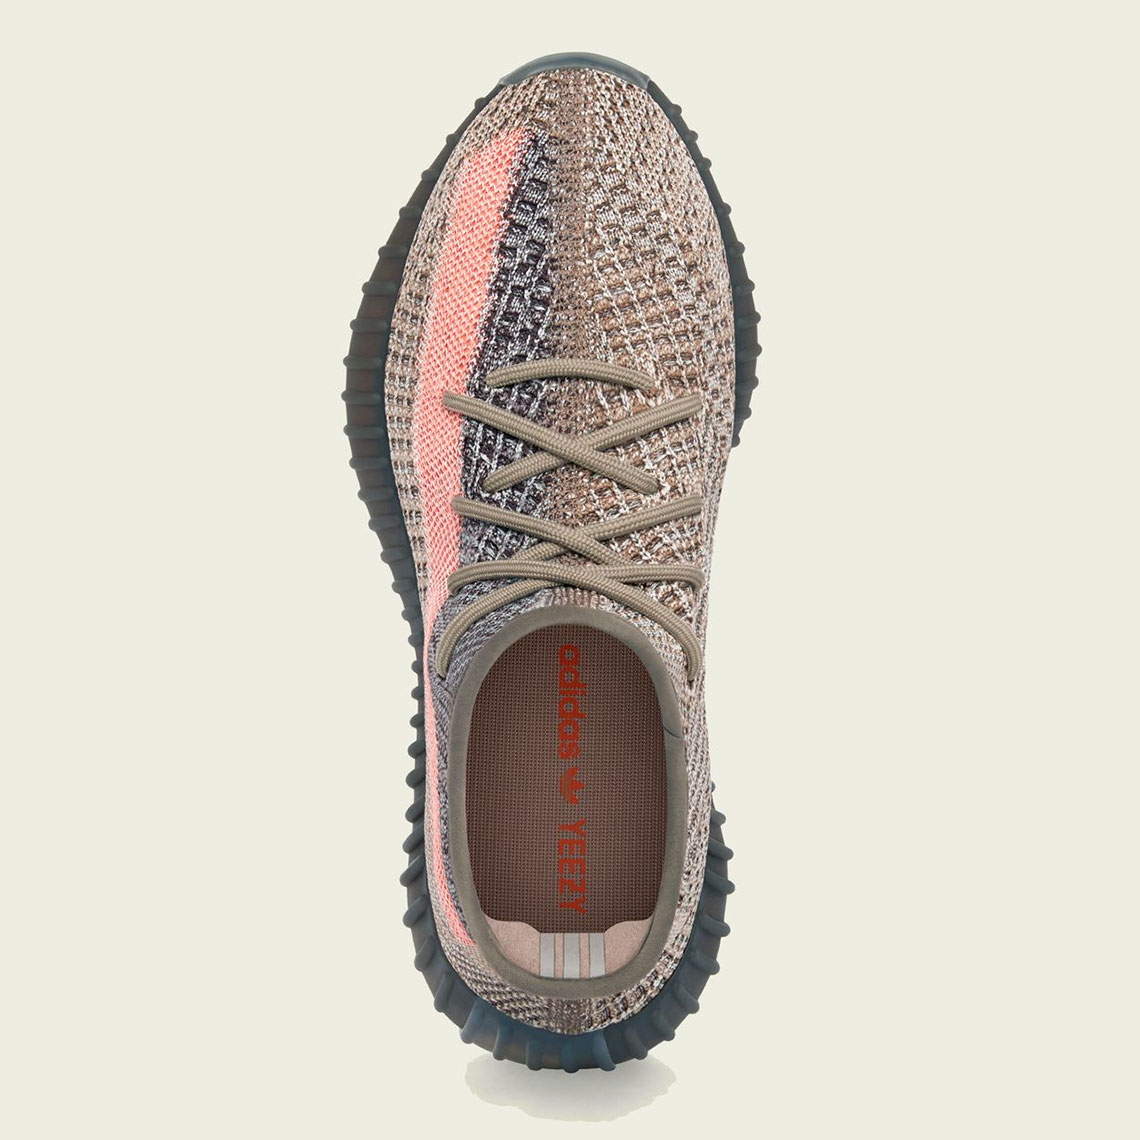 adidas ozweego Yeezy Boost 350 V2 Ash Stone Gw0089 Official Images 2